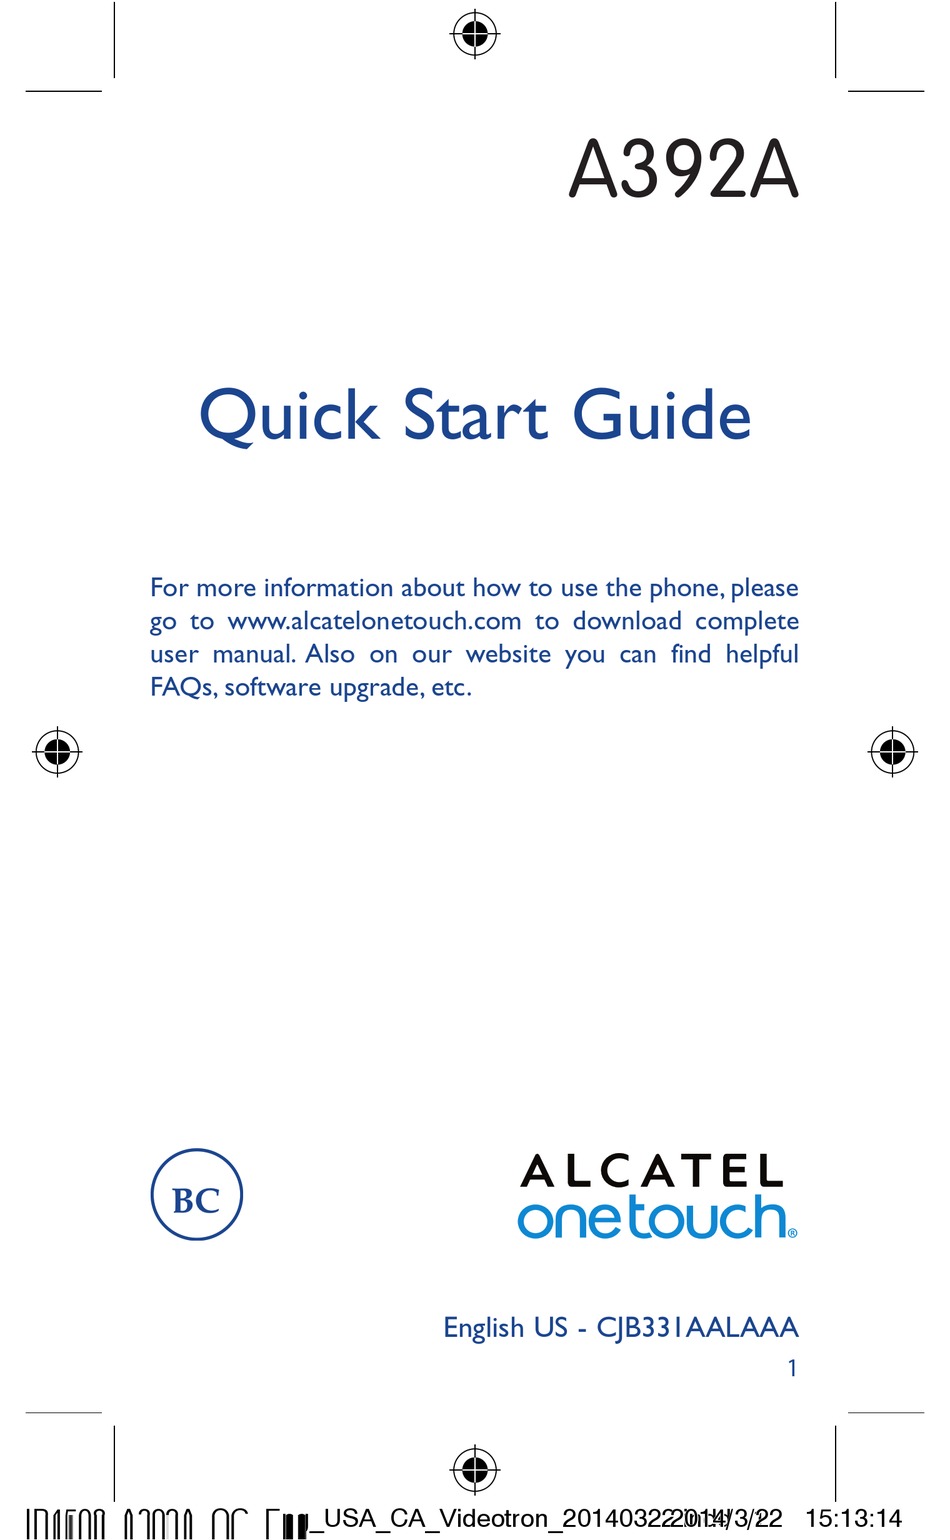 ALCATEL ONETOUCH A392A QUICK START MANUAL Pdf Download | ManualsLib